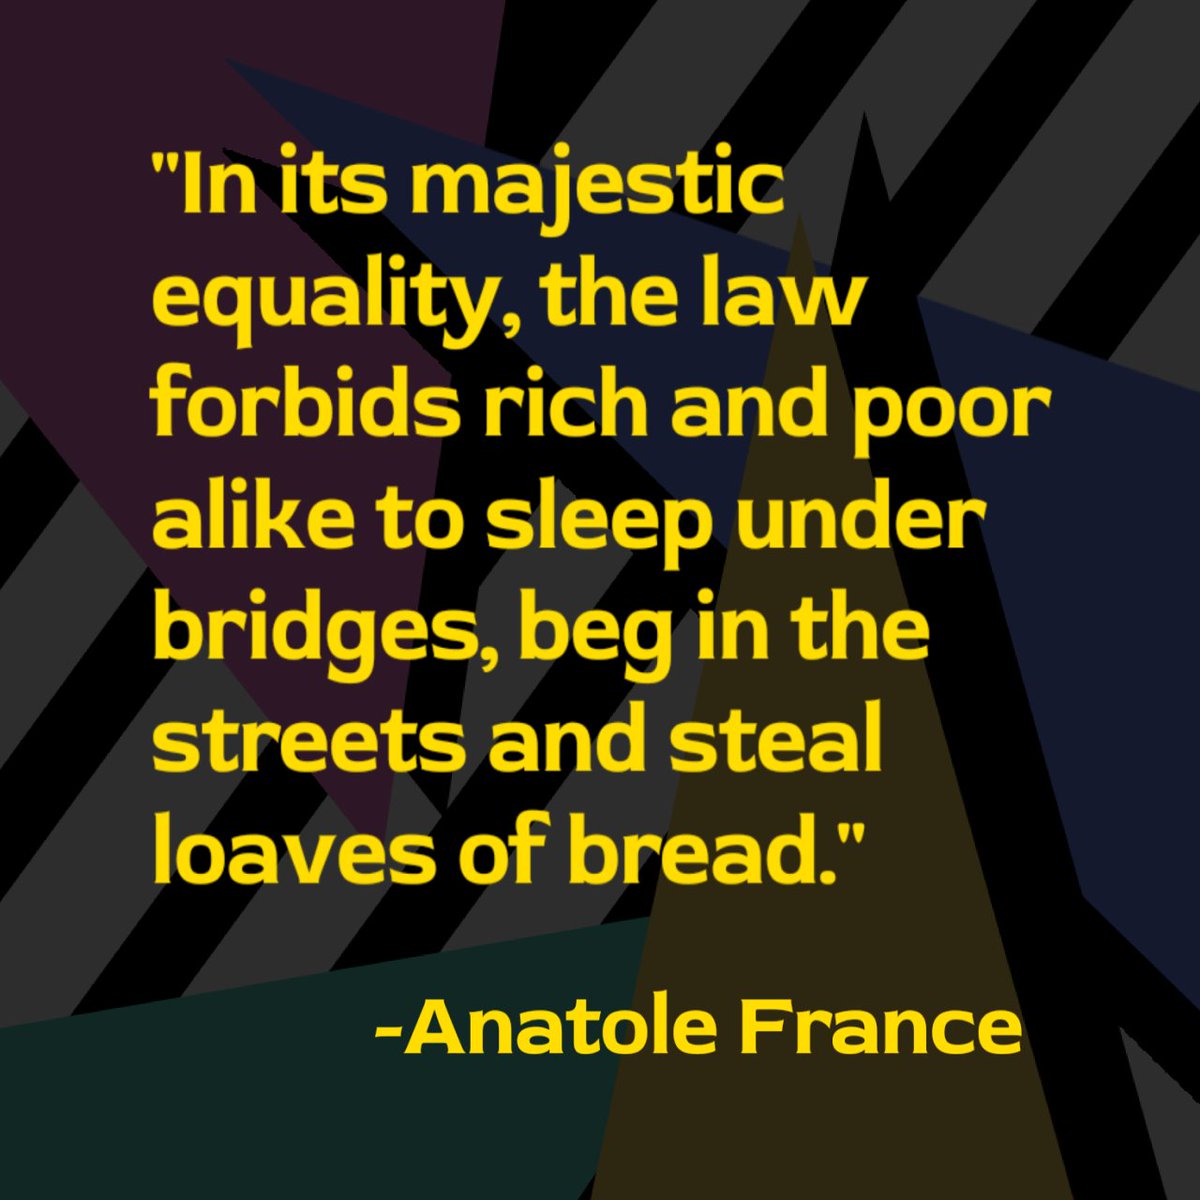 #systemicviolence
'In its majestic equality, the law forbids rich and poor alike to sleep under bridges, beg in the streets and steal loaves of bread.'.
-#AnatoleFrance